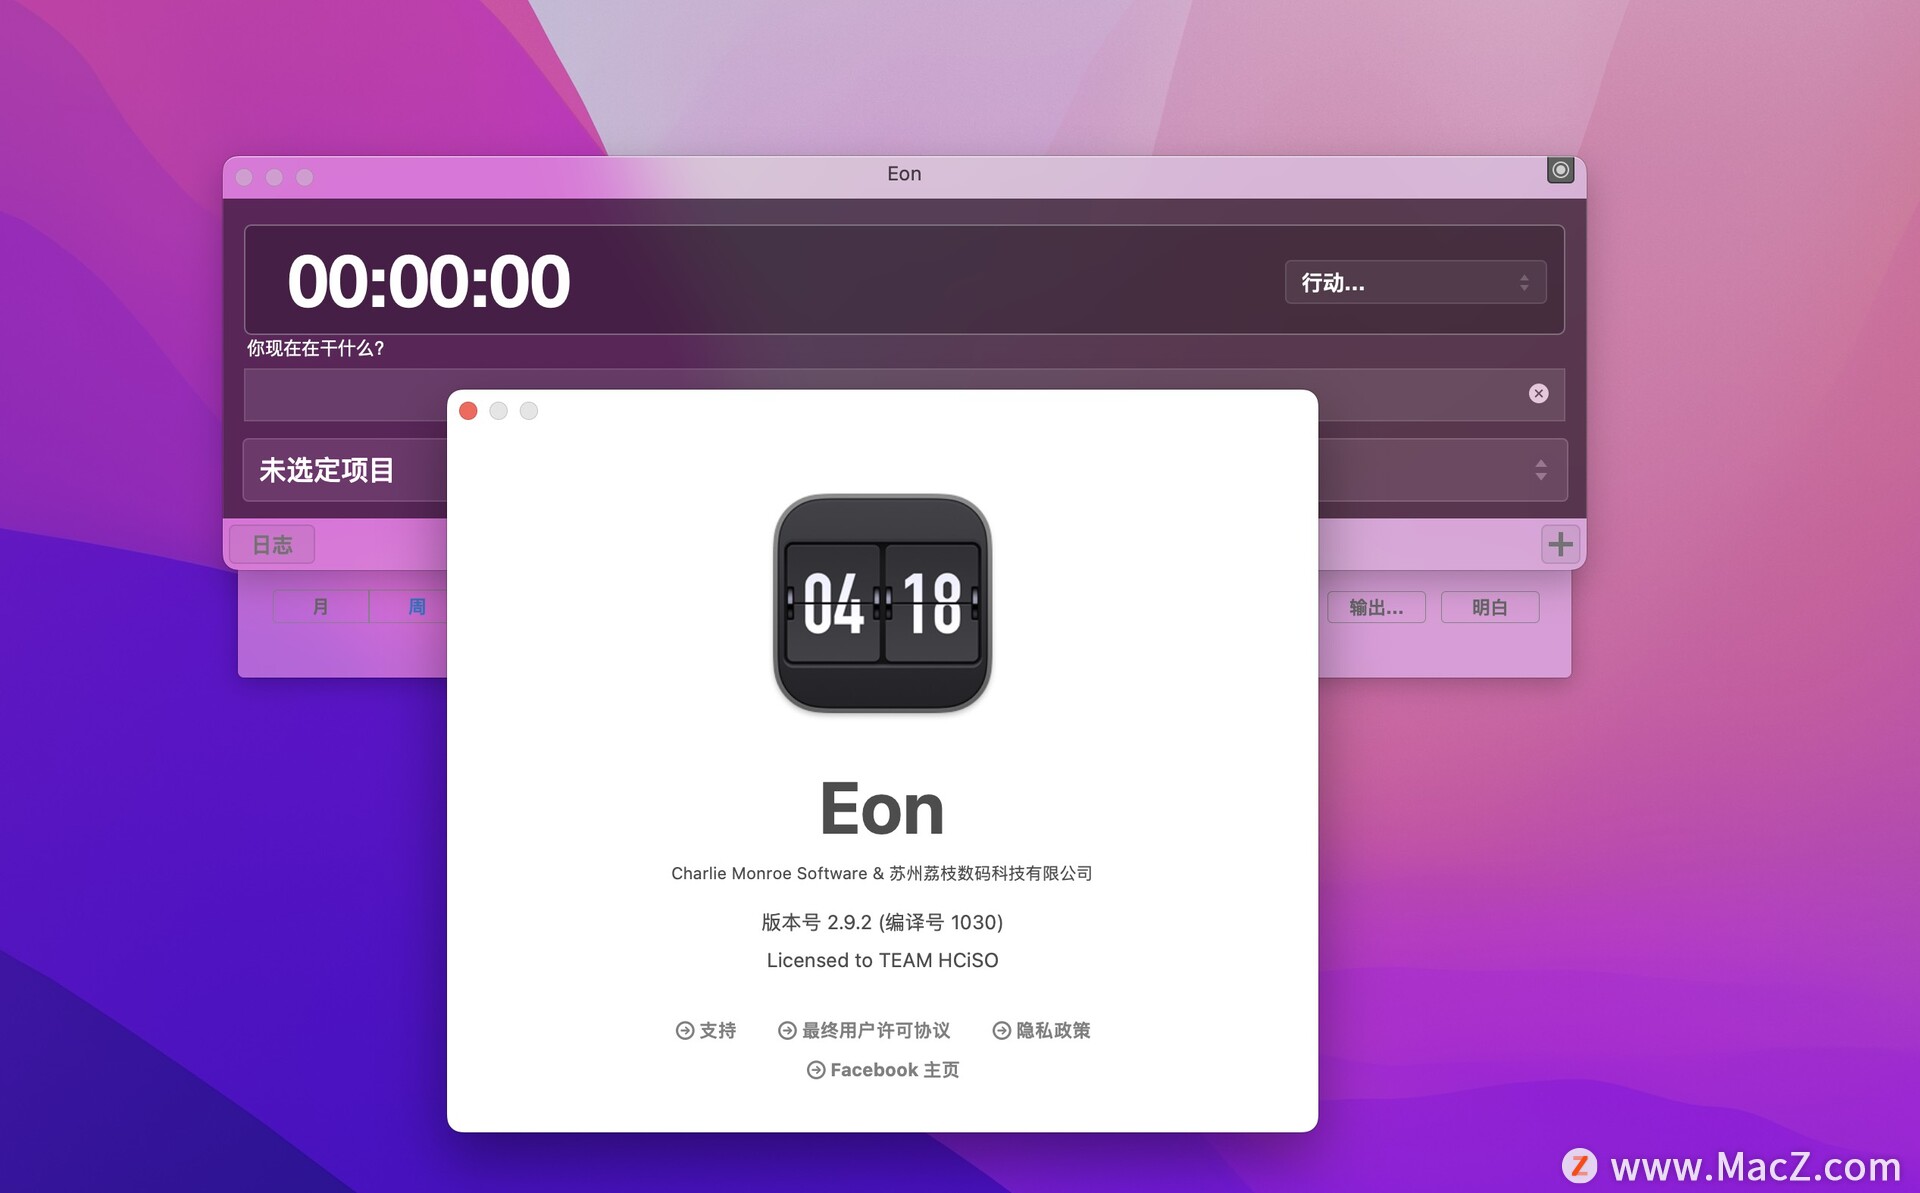 eon timer beeps not in time